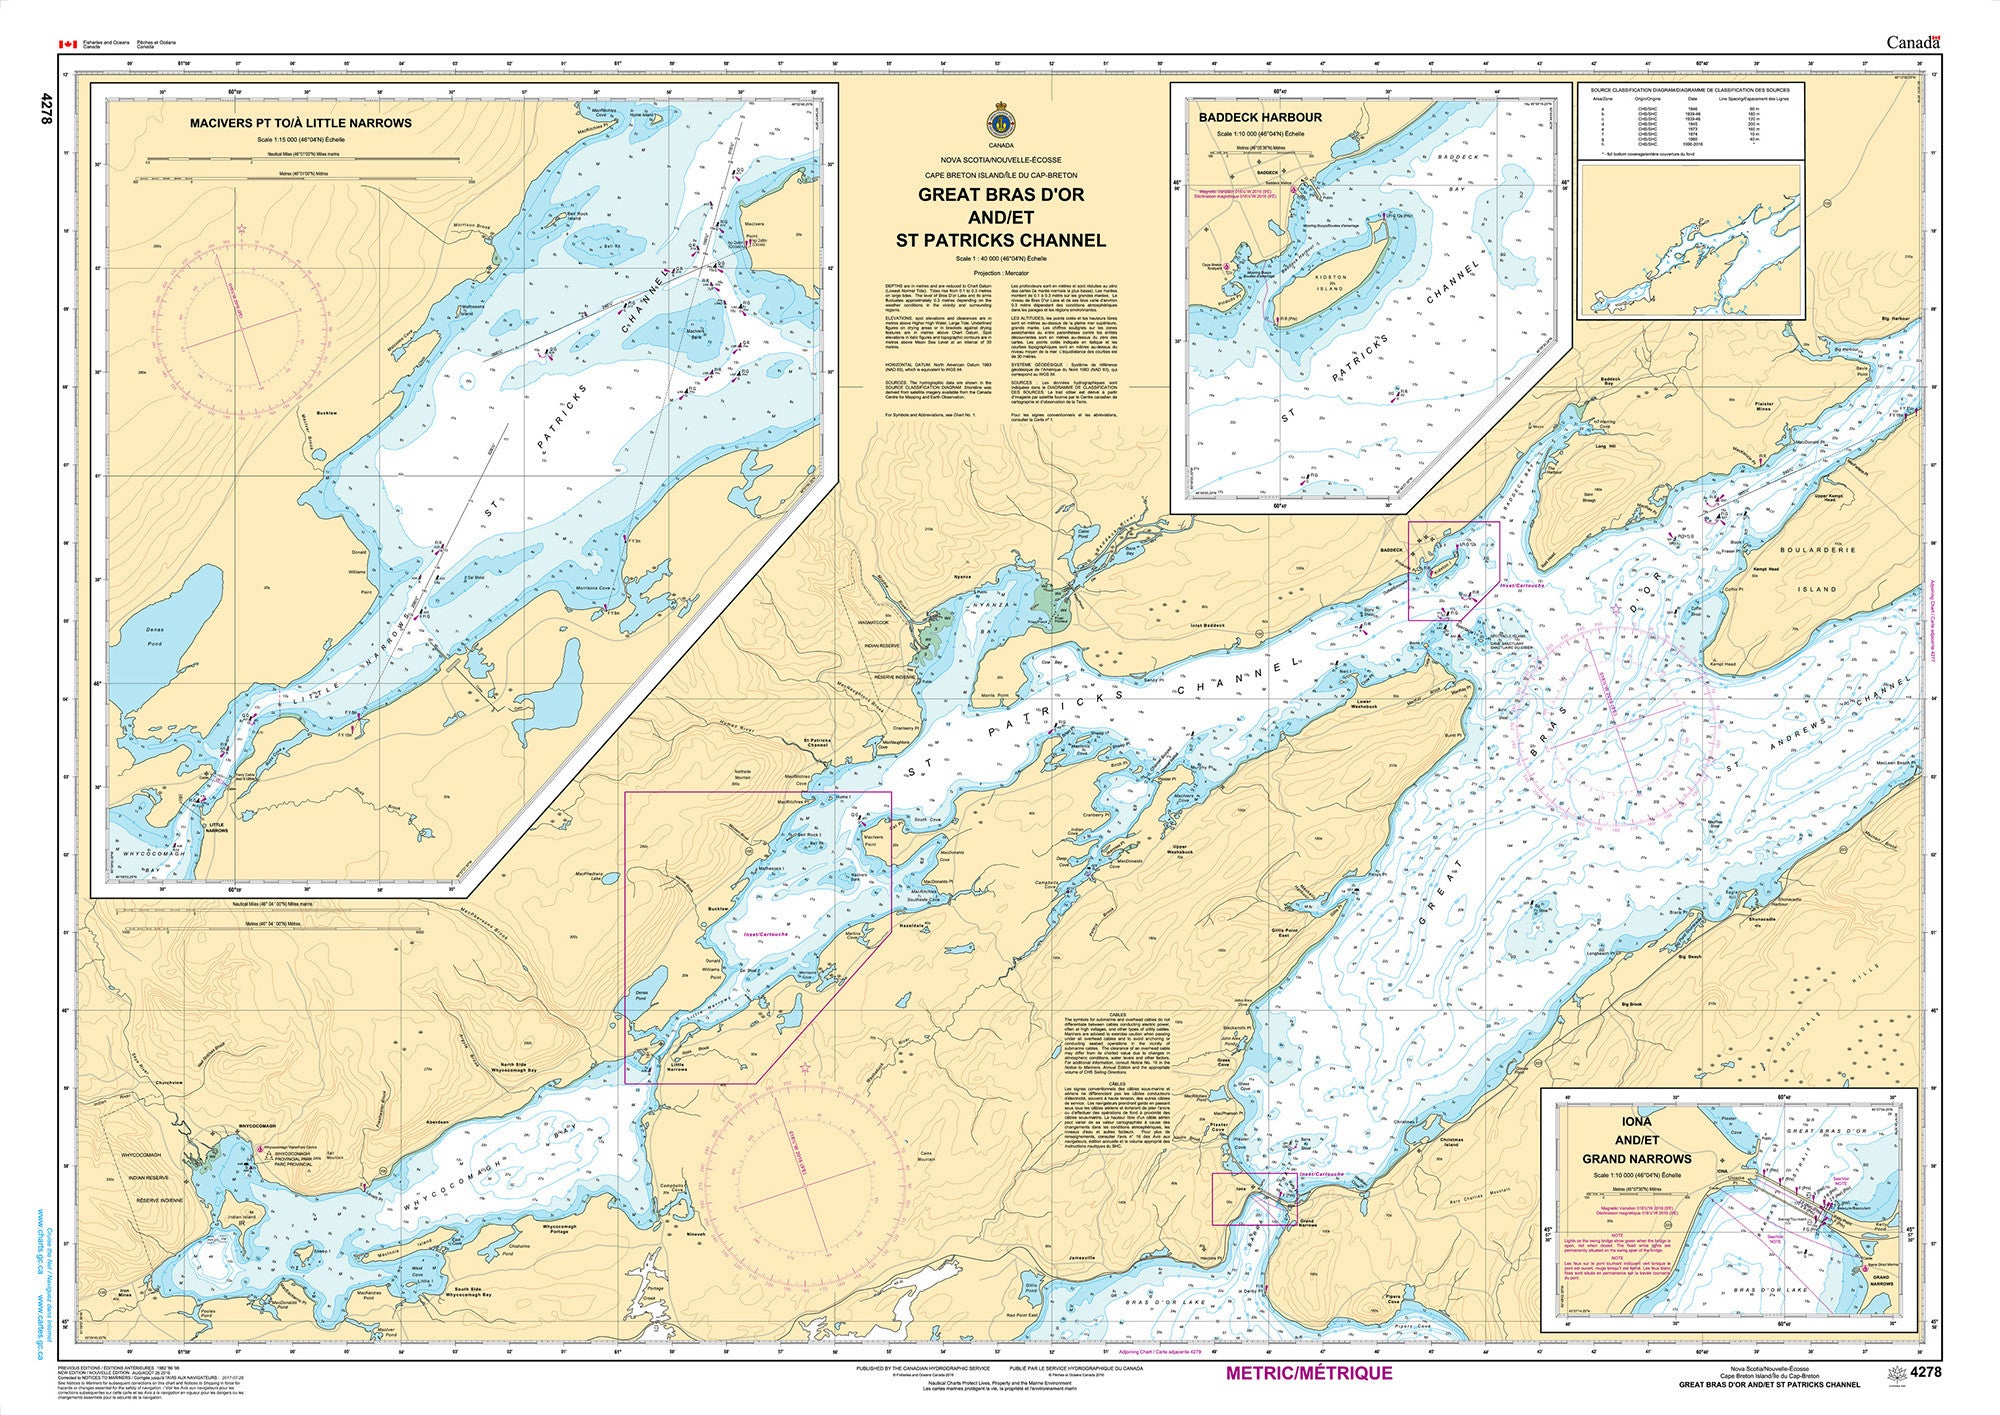 Canadian Hydrographic Service Nautical Chart CHS4278: Great Bras D'Or and/et St. Patricks Channel